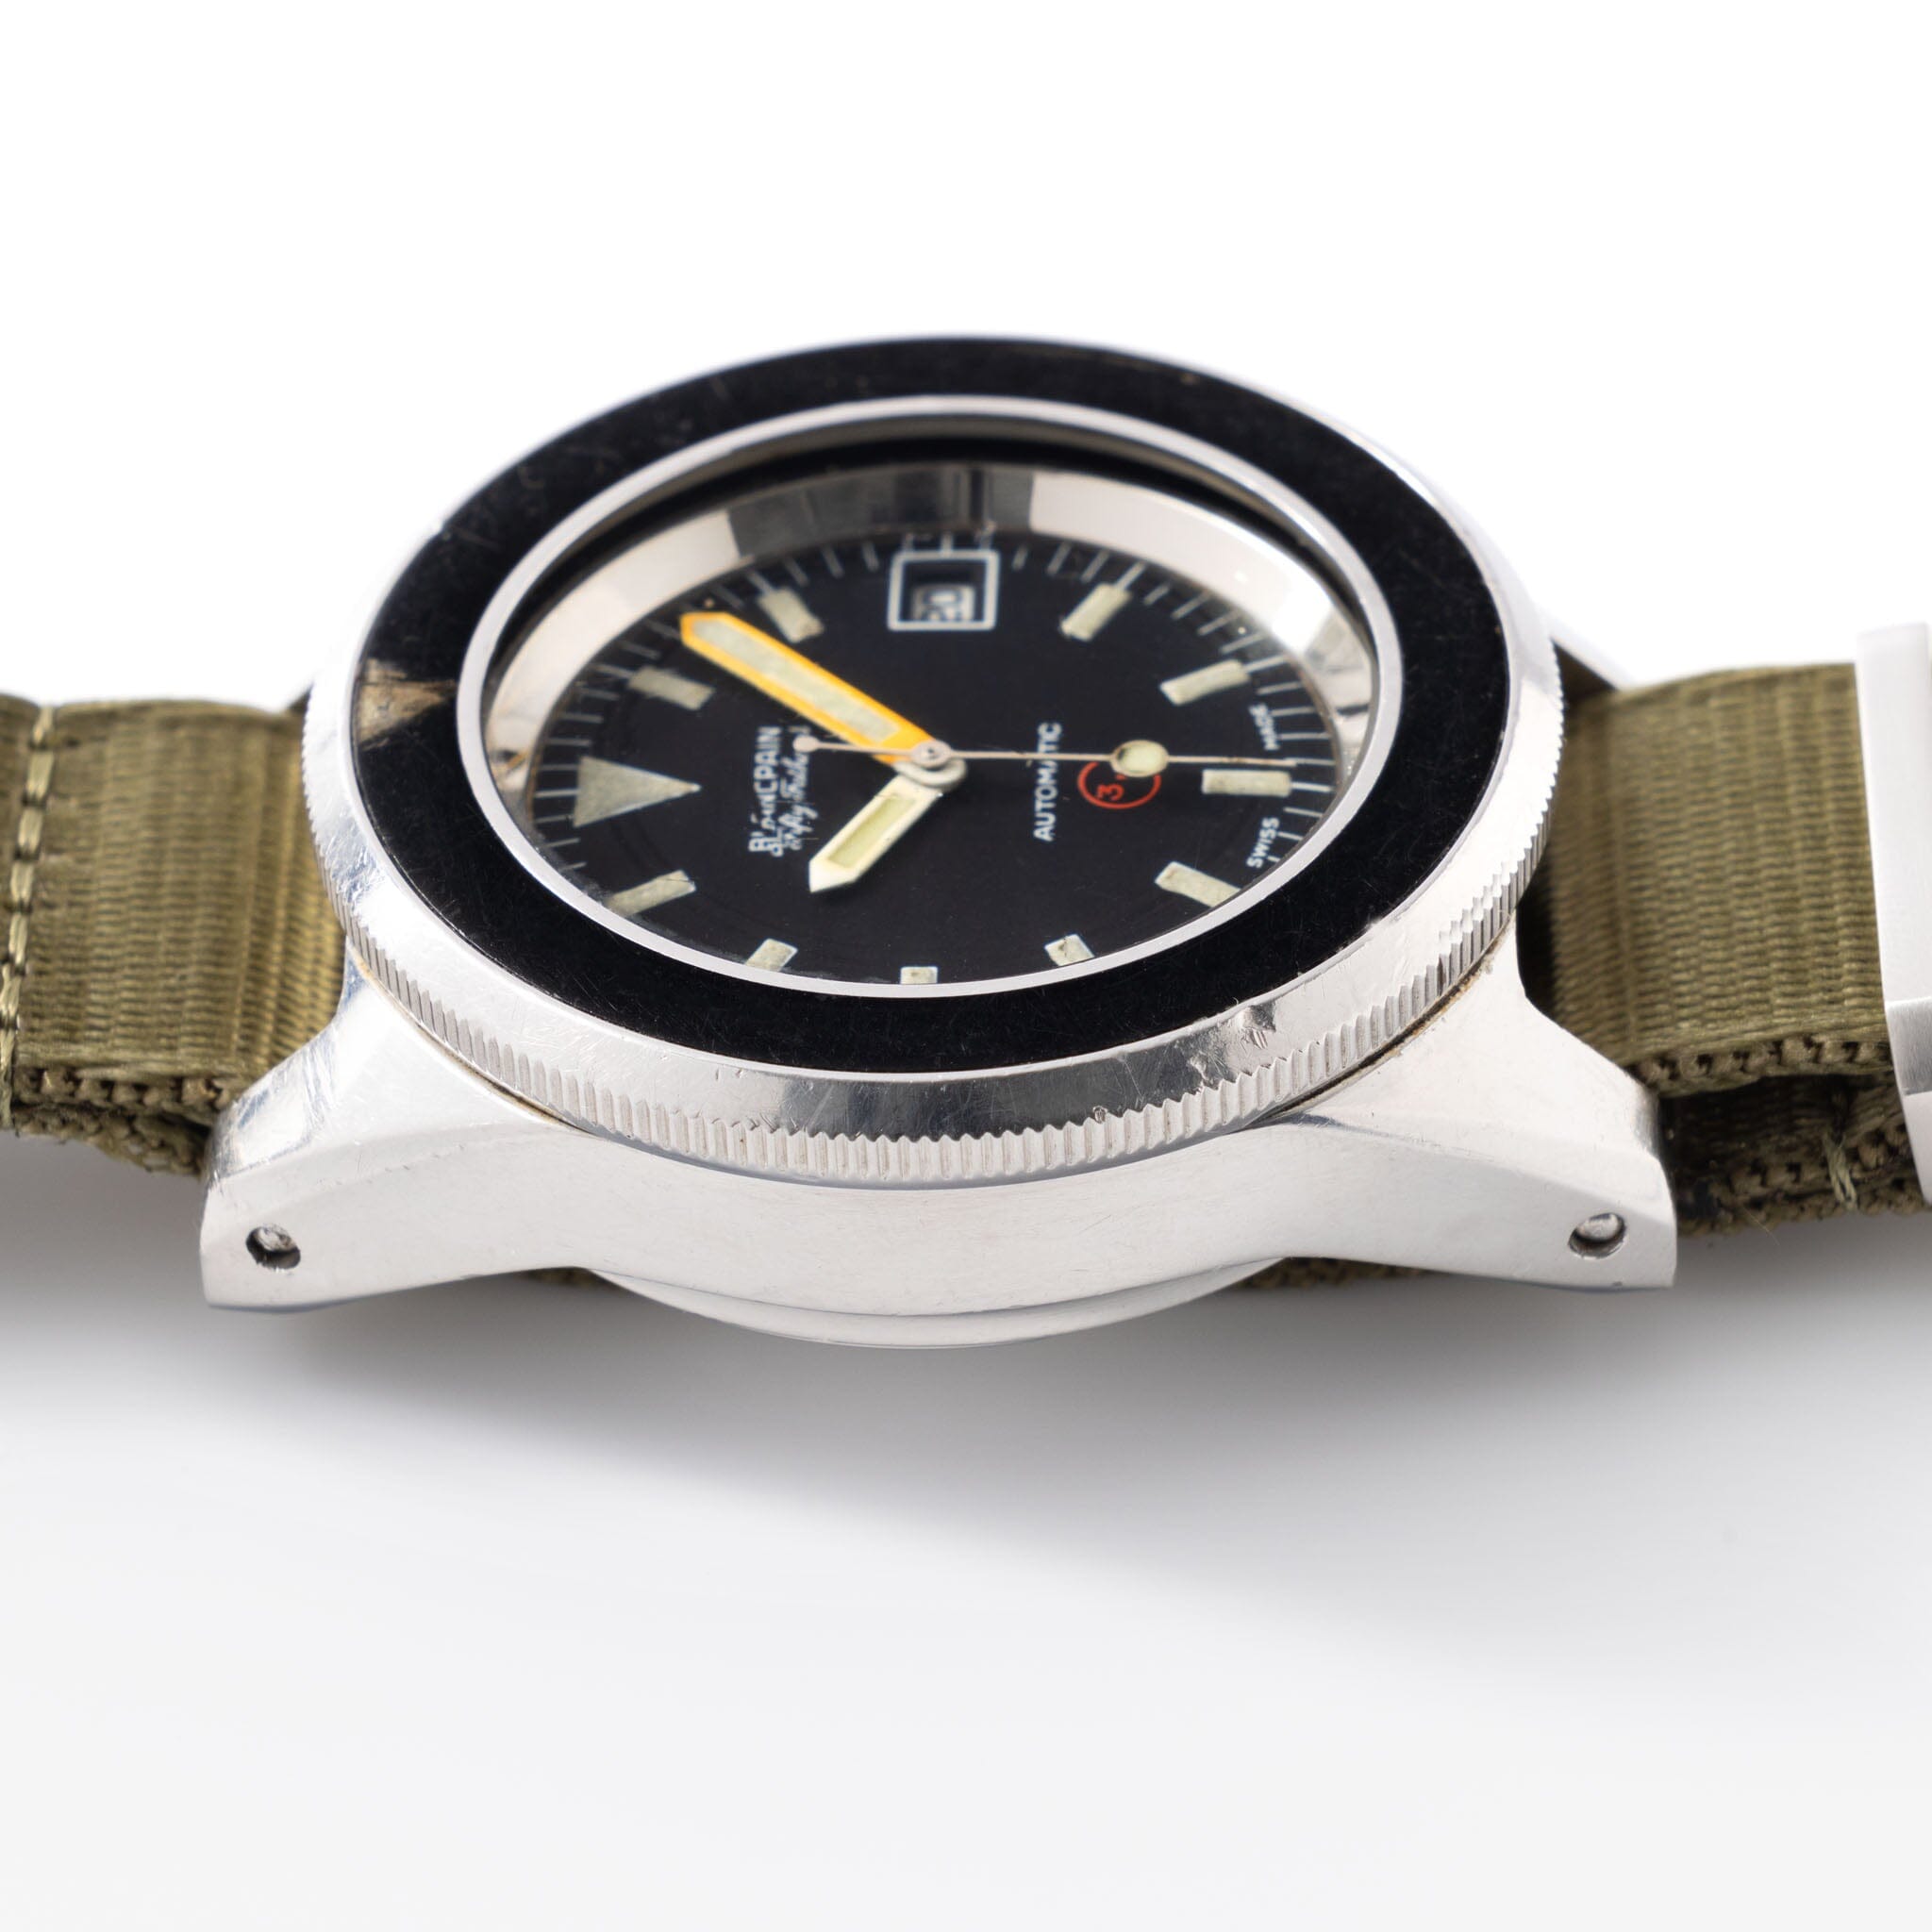 Blancpain Fifty Fathoms Military 3H Bund Issued Dive Watch